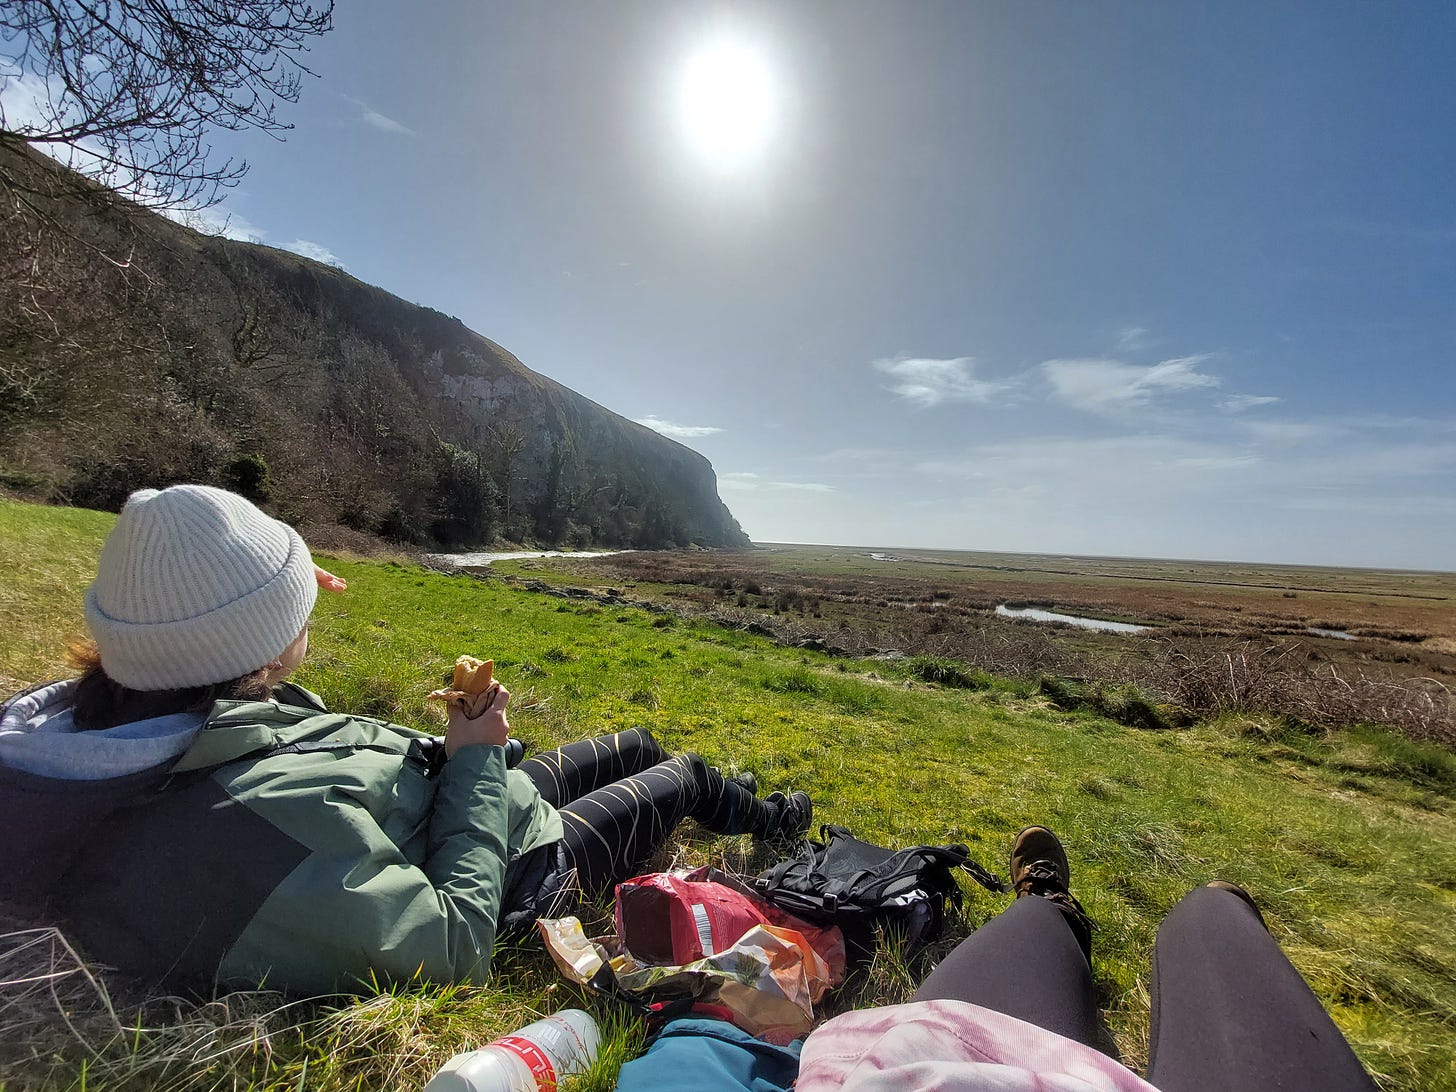 One person reclining eating a sandwich whilst looking out at a spectacular view. A cliff to the left, blue sky and marsh land. The legs of the photographer are in shot too. The best picnic spot!